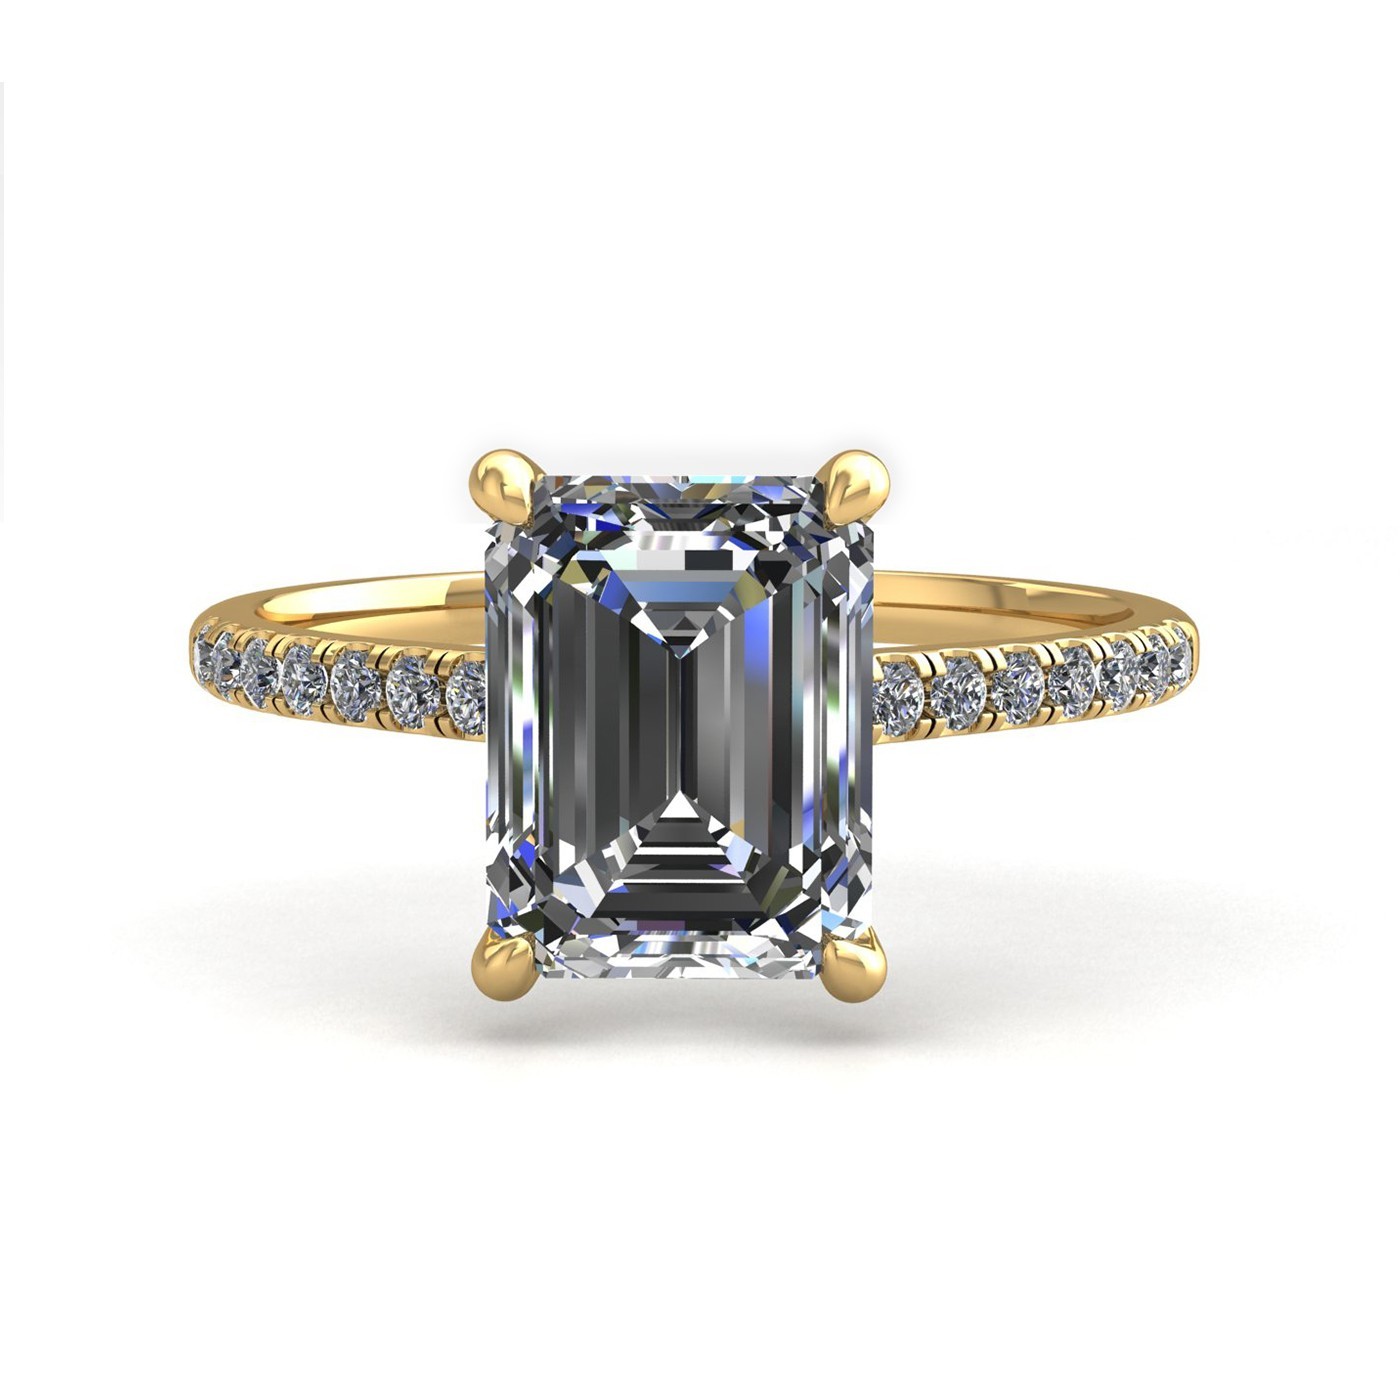 18k yellow gold 2.0ct 4 prongs emerald cut diamond engagement ring with whisper thin pavÉ set band